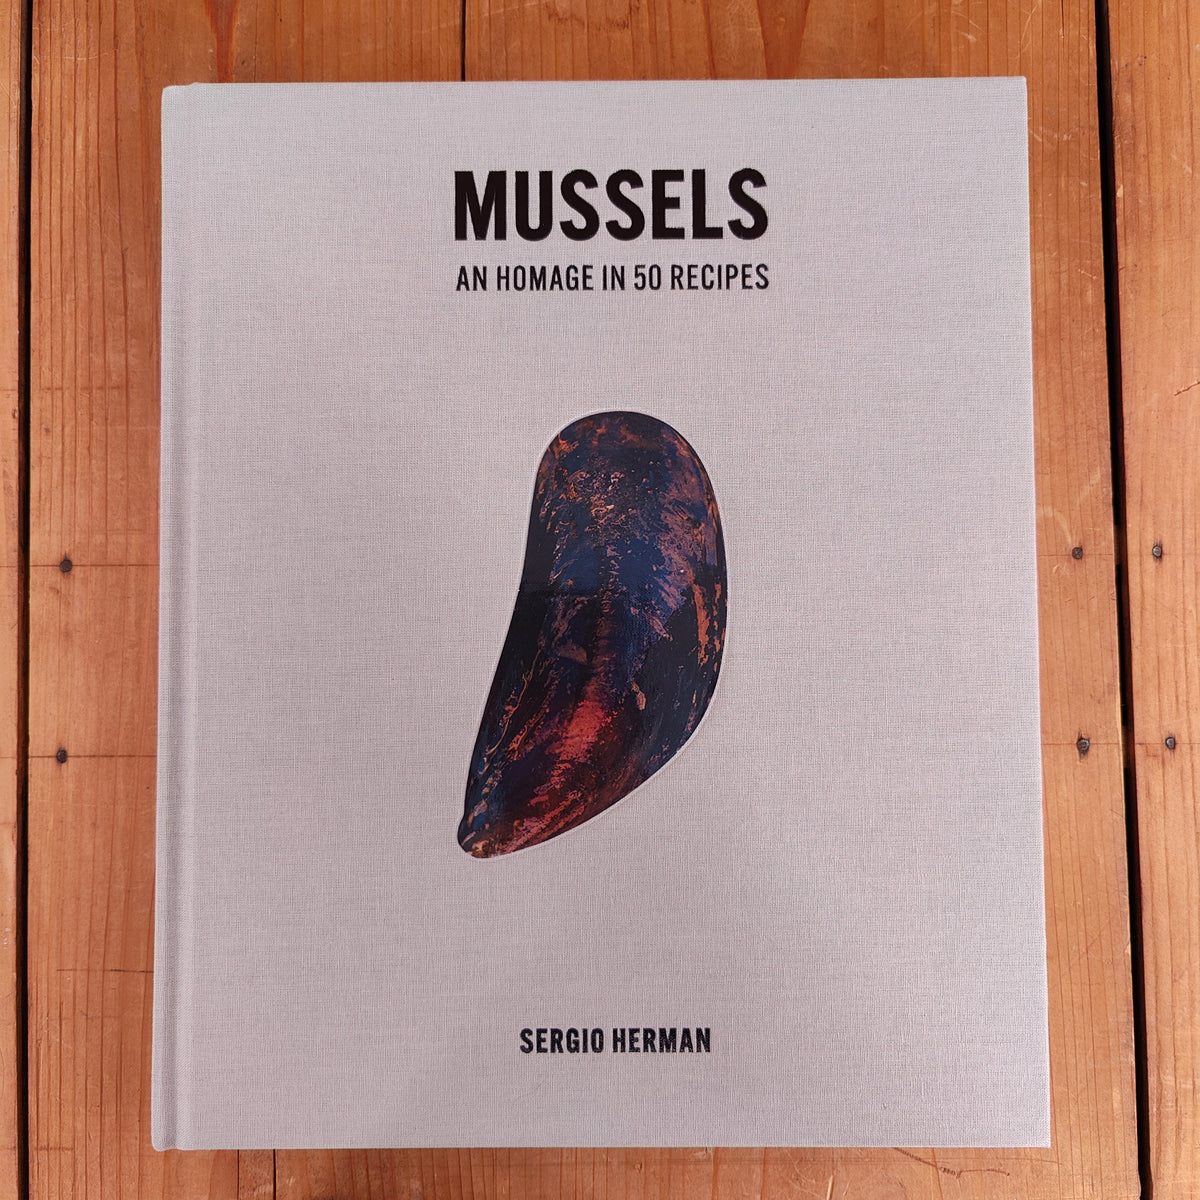 Mussels: An Homage in 50 Recipes - Sergio Herman